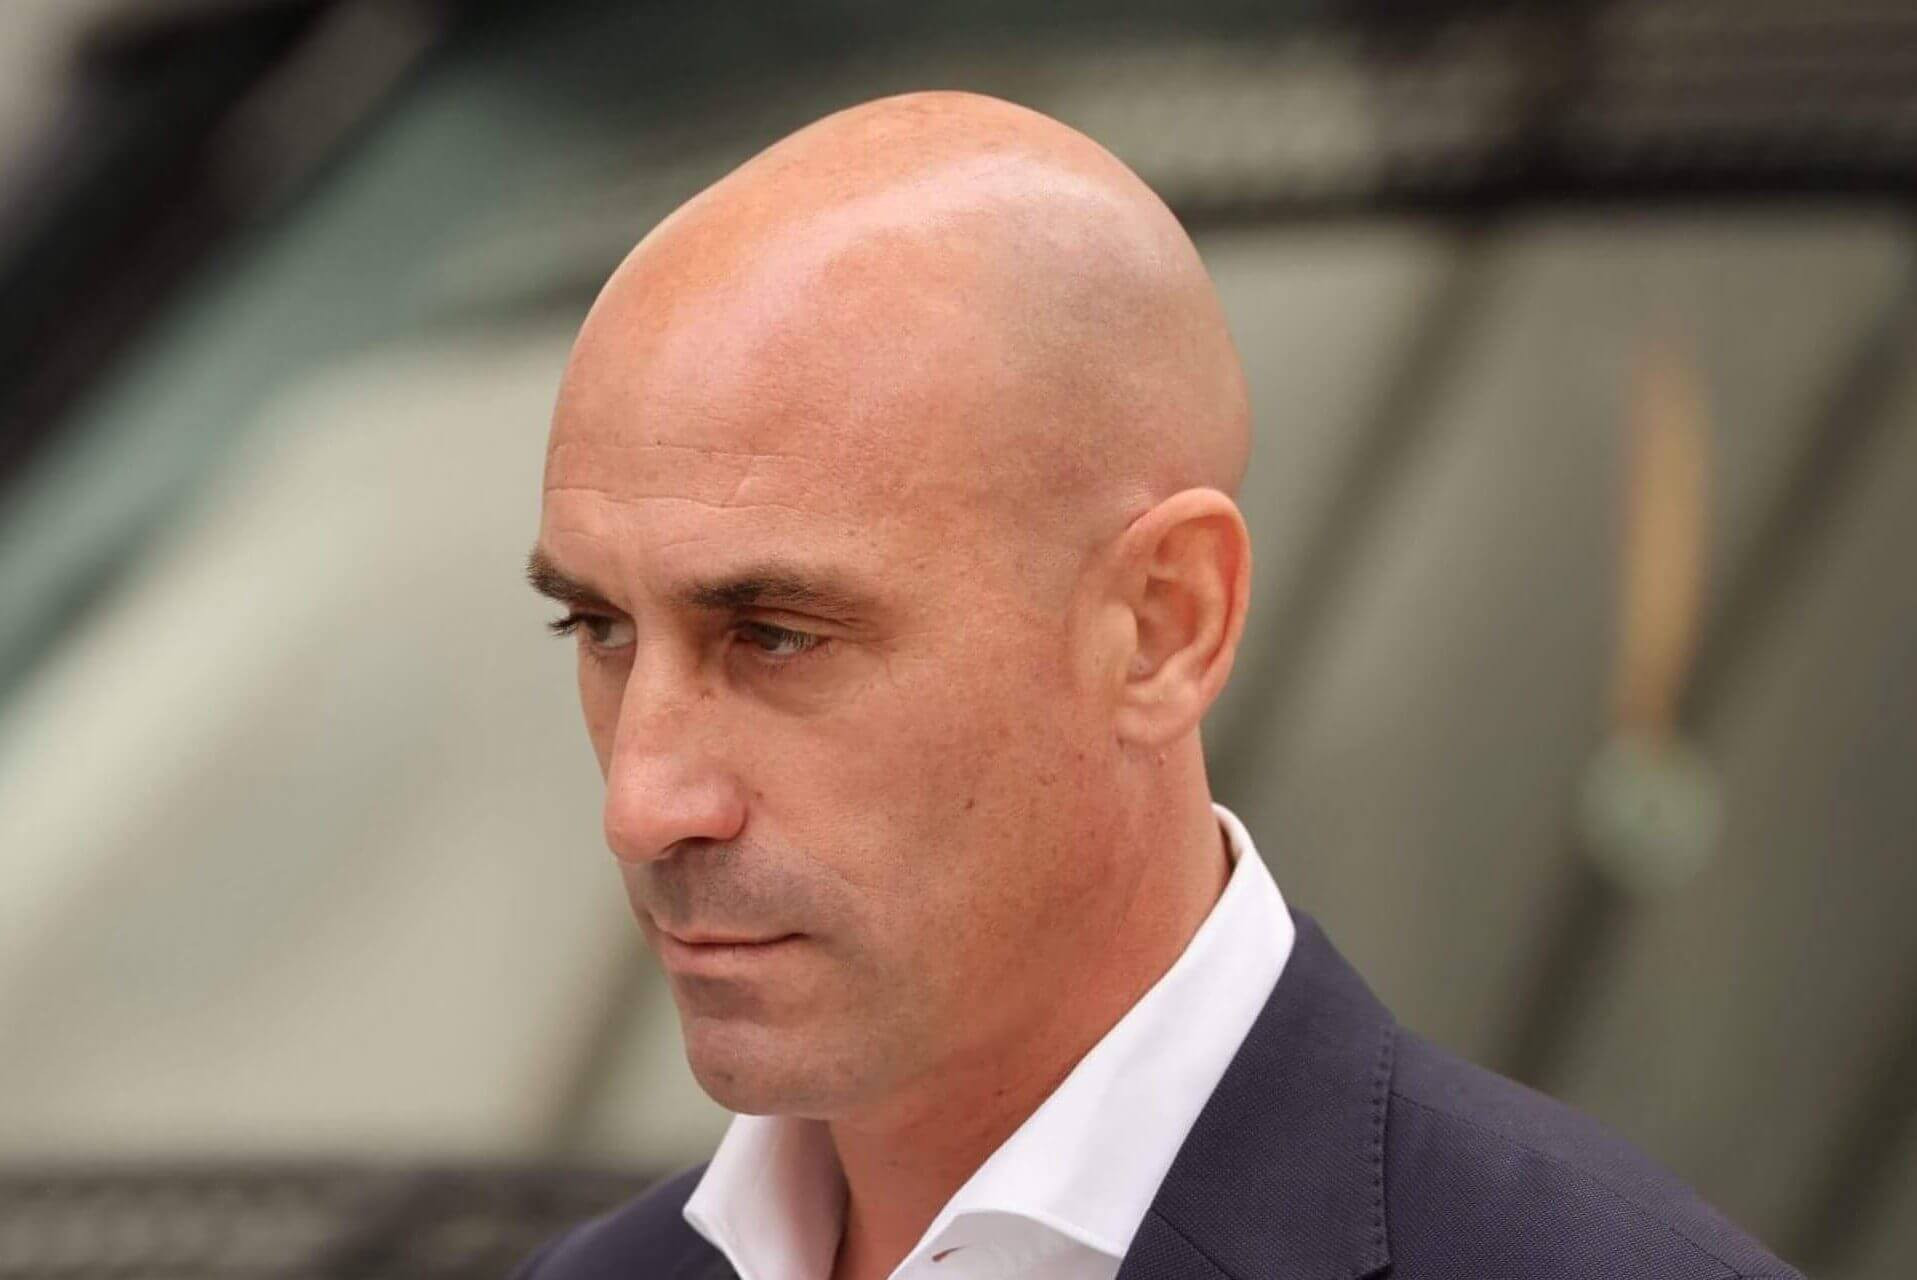 Spanish Football Image at Stake: Rubiales Arrest for Corruption